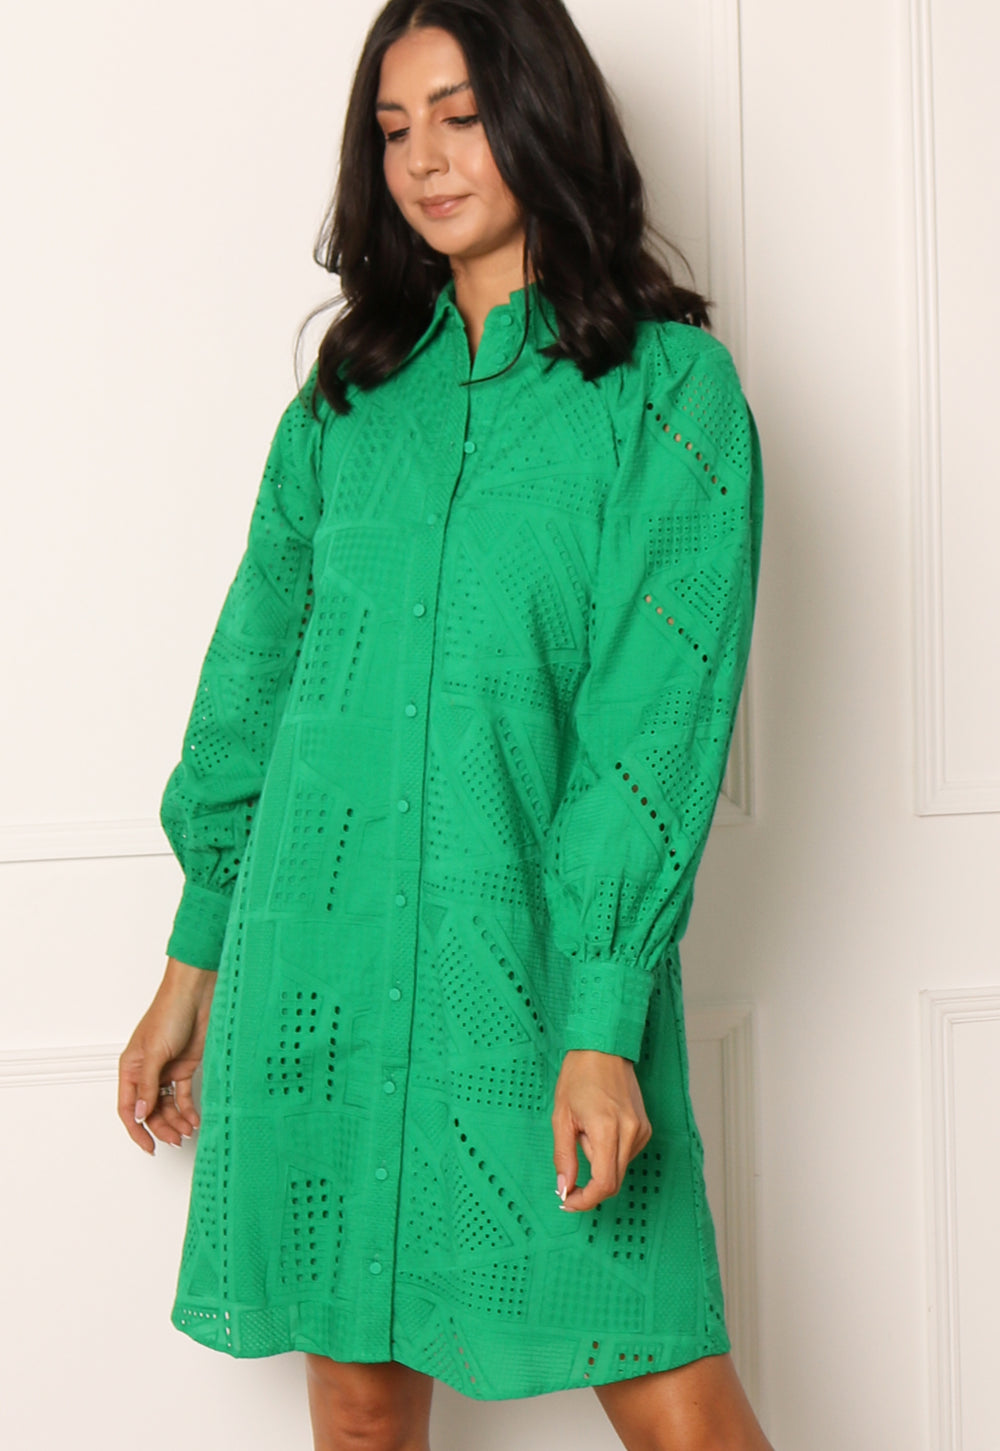 YAS Sado Shirt Sado Sleeve Broderie Nation in Anglaise Green Clothing YAS One in Long Dress | Sleeve Anglaise Bright Dress Long Broderie Green Bright Shirt